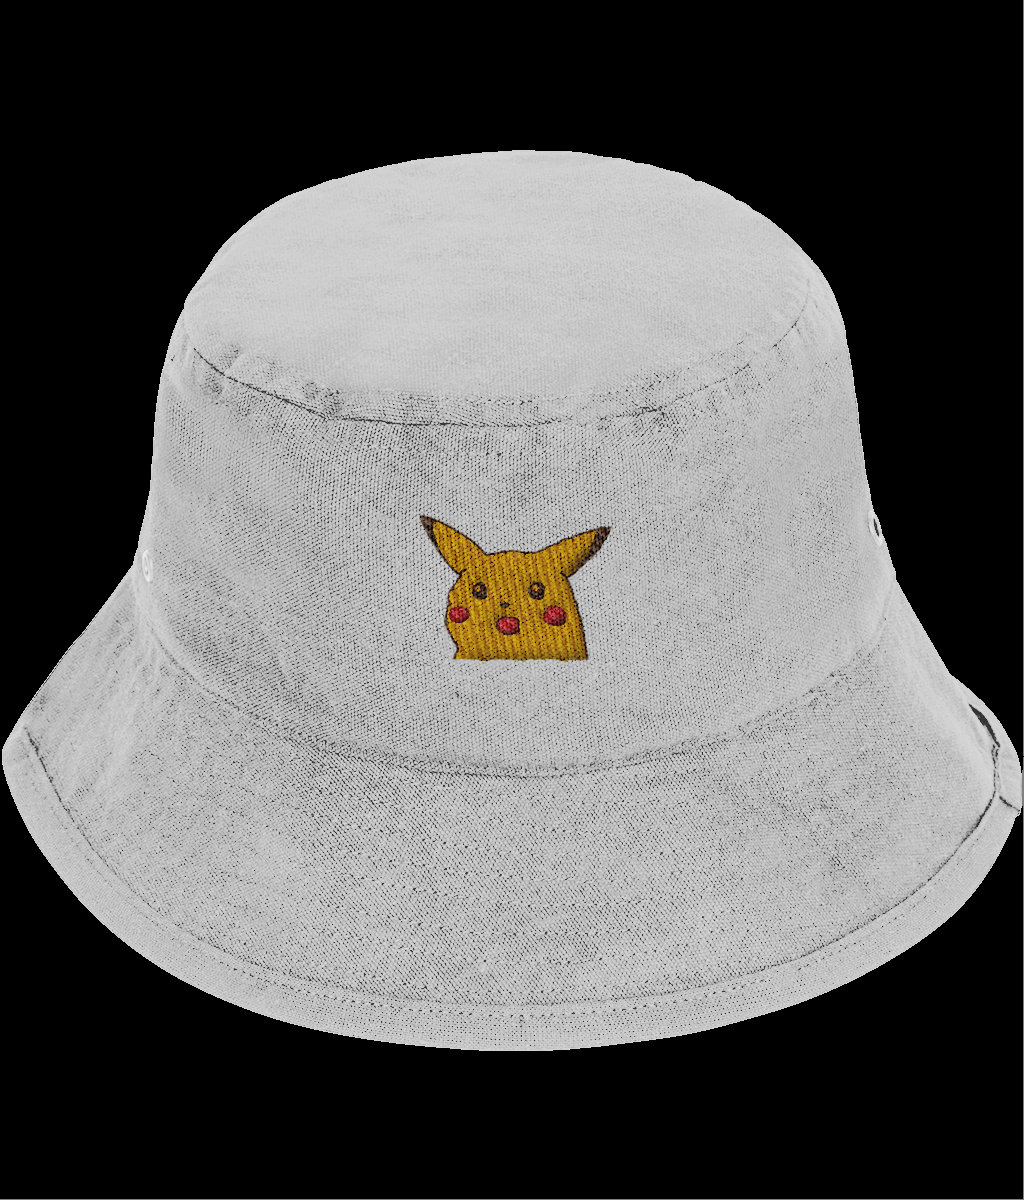 excited to share the latest addition to our #etsy shop✨ Surprised Pikachu | Embroidered Bucket Hat etsy.me/40npMkC #recycledpolyester #meme #pikachu #pokemon #cute #reactionmeme #streetwear #forhim #forher